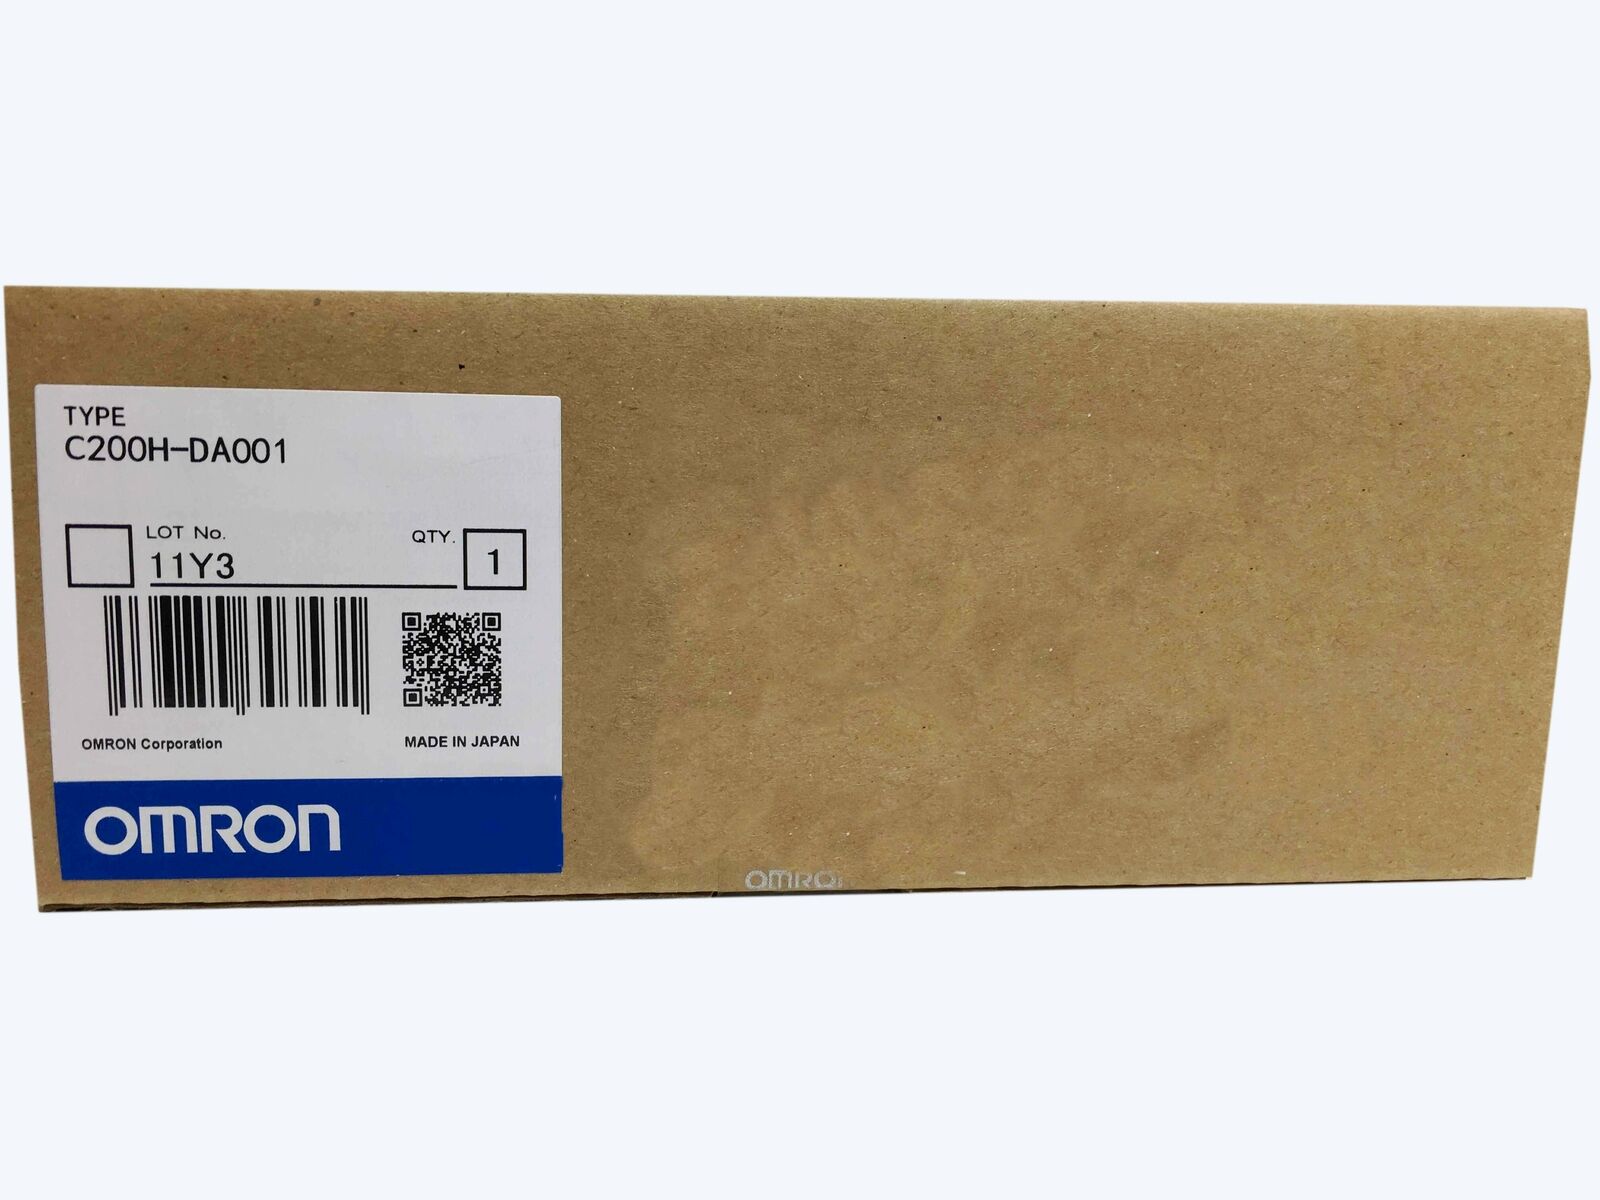 1pc new Omron analog output unit C200H-DA001 one year warranty KOEED 101-200, 80%, import_2020_10_10_031751, Omron, Other